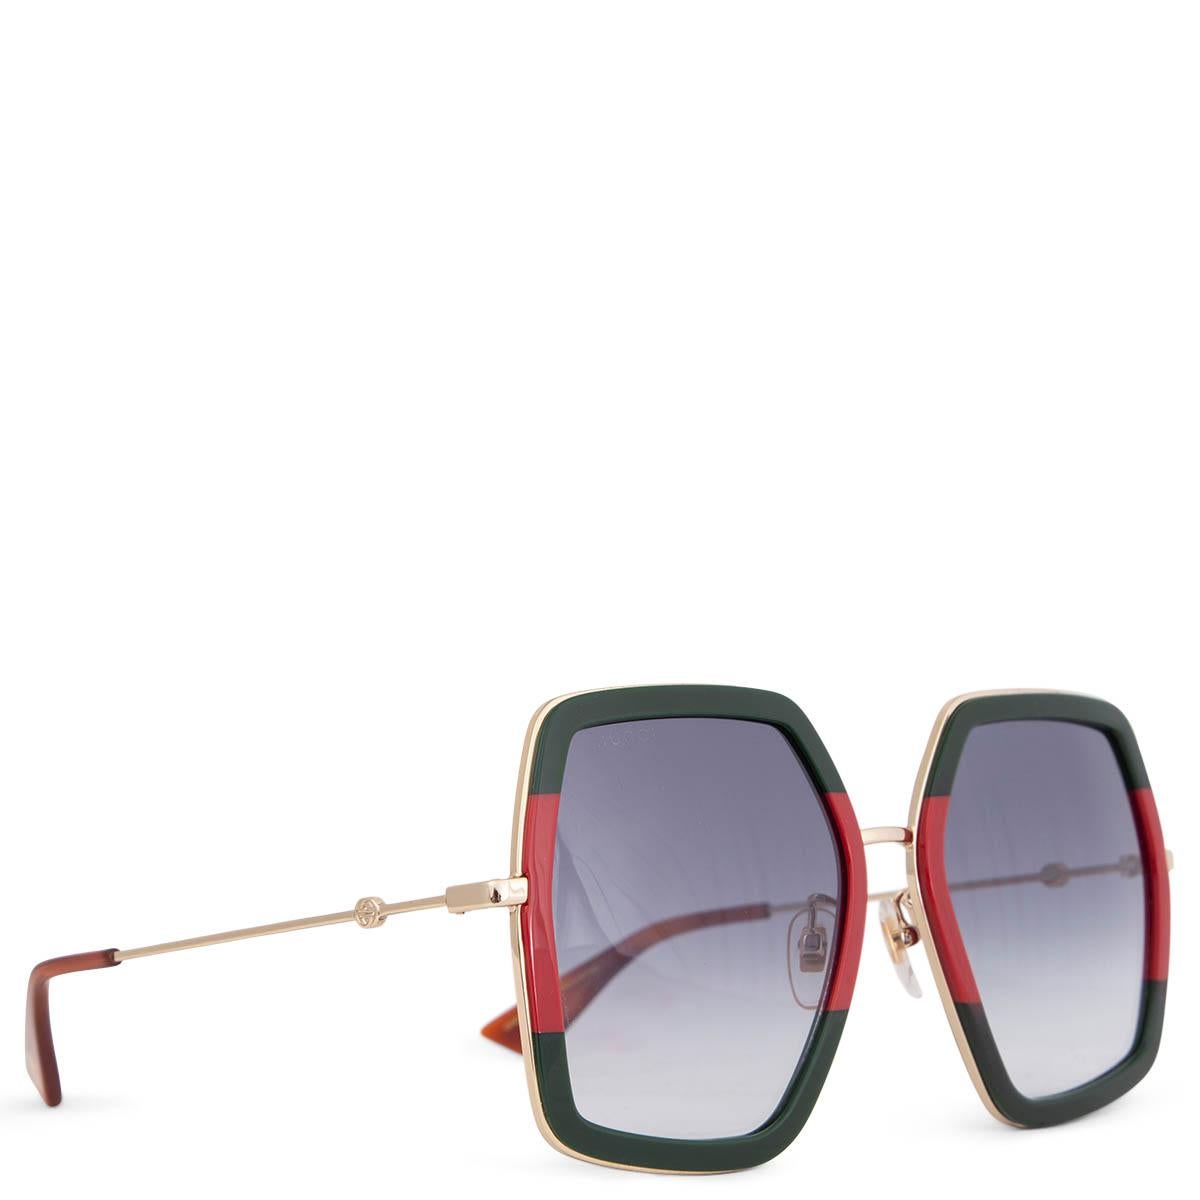 100% authentic Gucci oversized rectangular sunglasses in dark green and red acetate with light gold-tone metal temples. Lenses are in gradient light grey. Have beeb worn and are in excellent condition. Come with case.